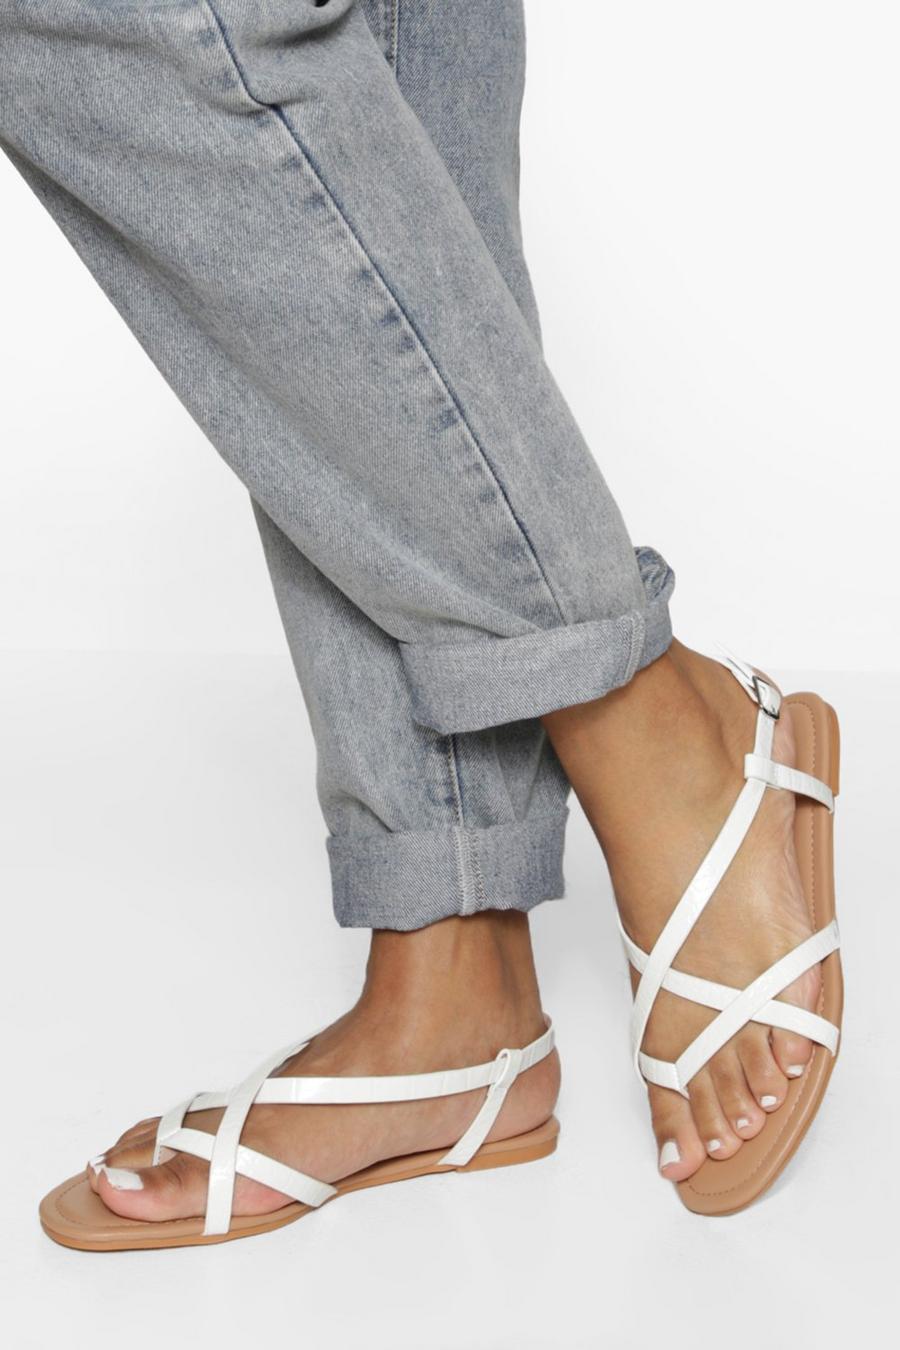 White blanc Wide Fit Croc Toe Post Basic Strappy Sandal